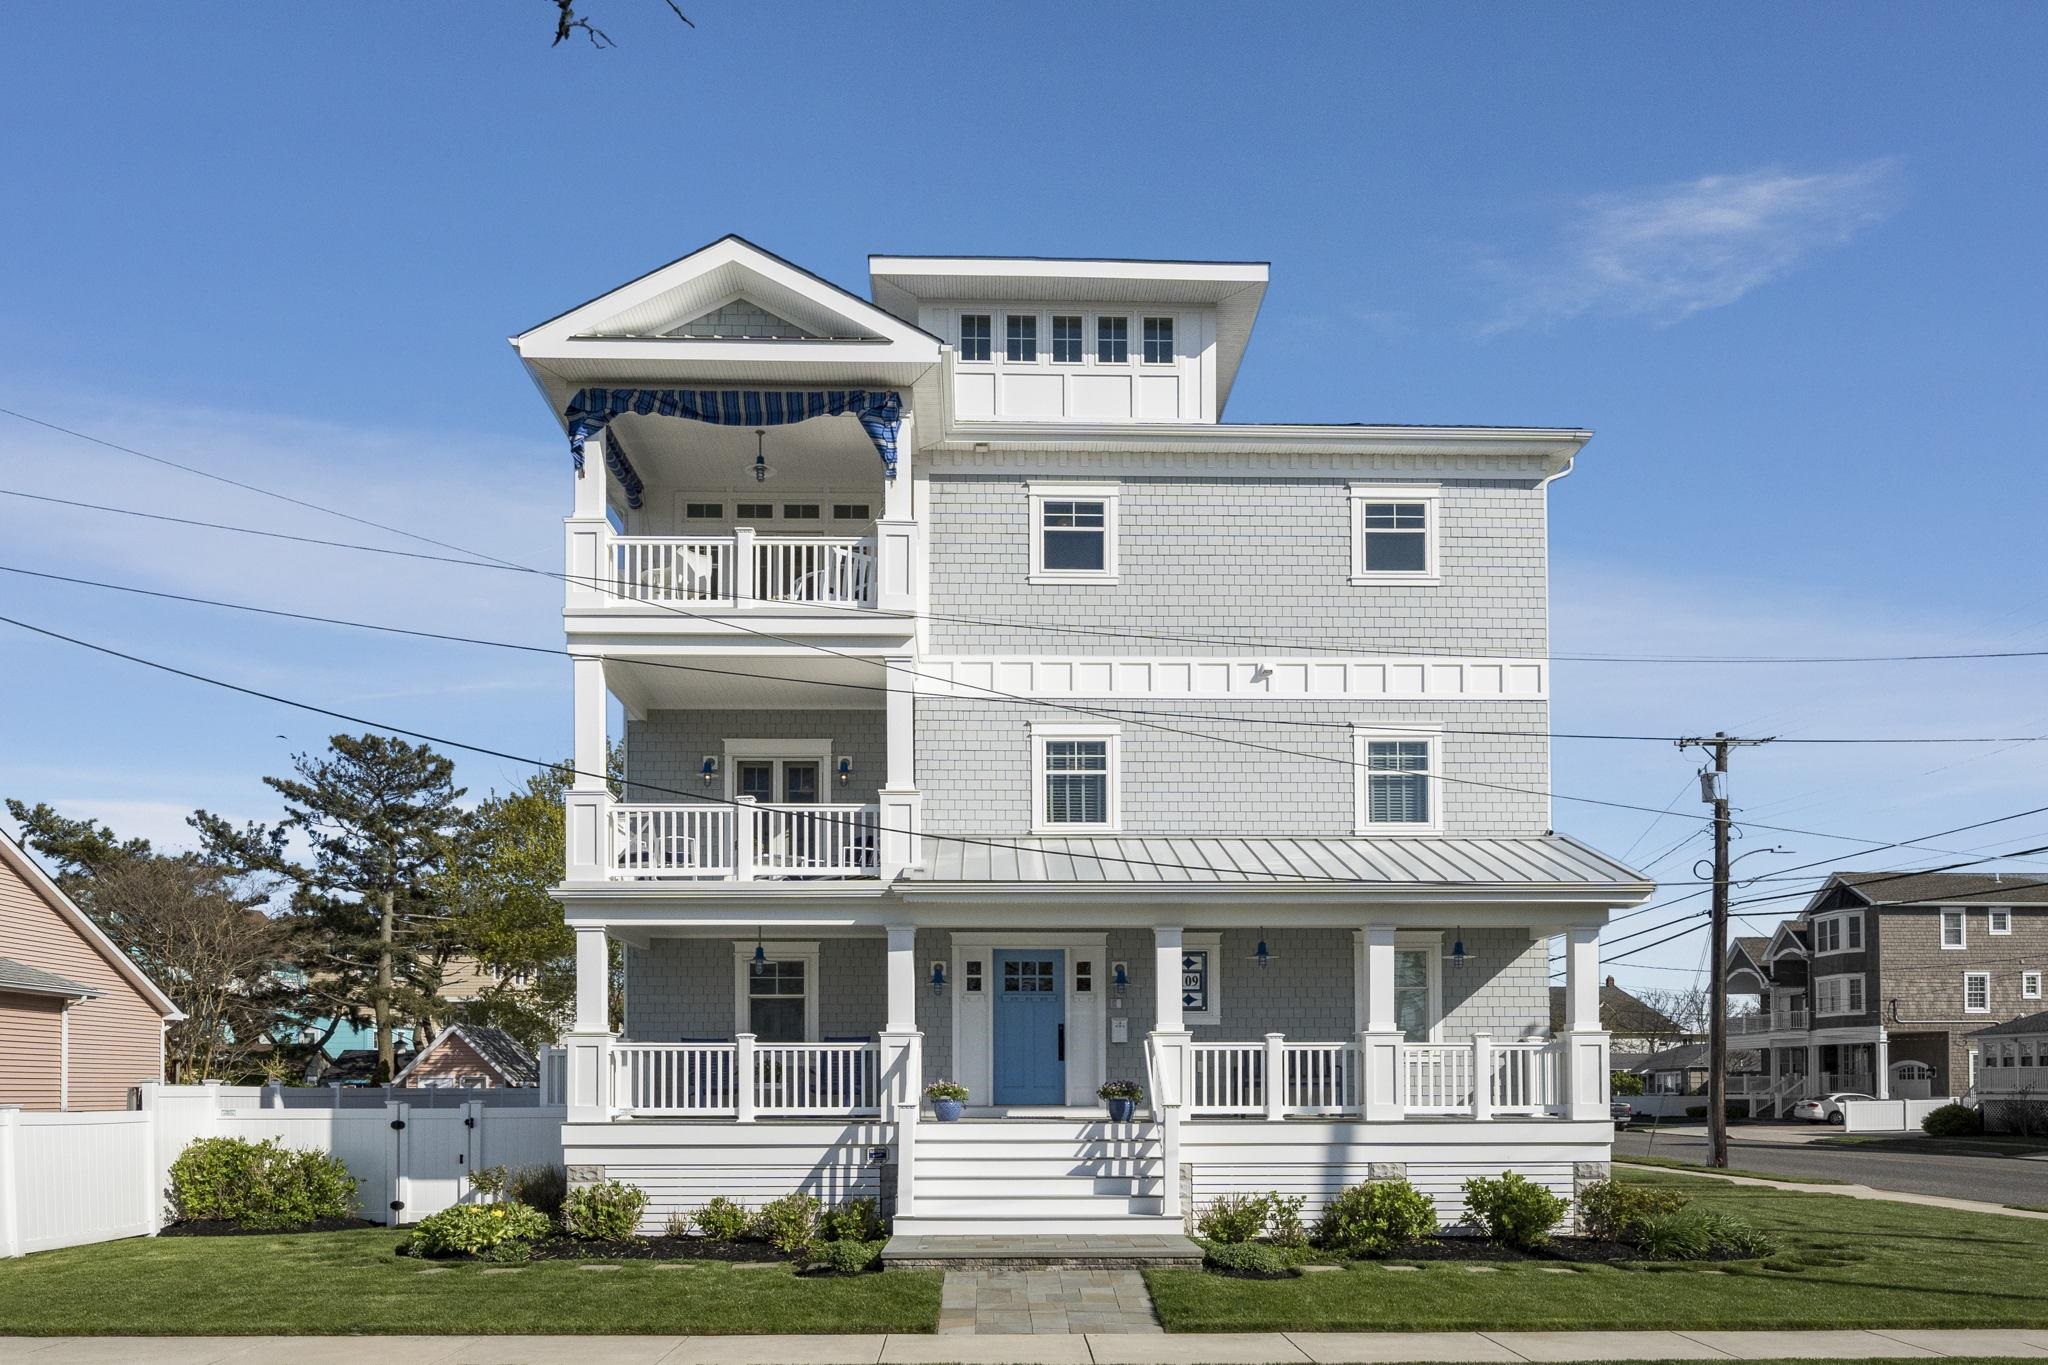 109 111 Central Avenue - North Wildwood